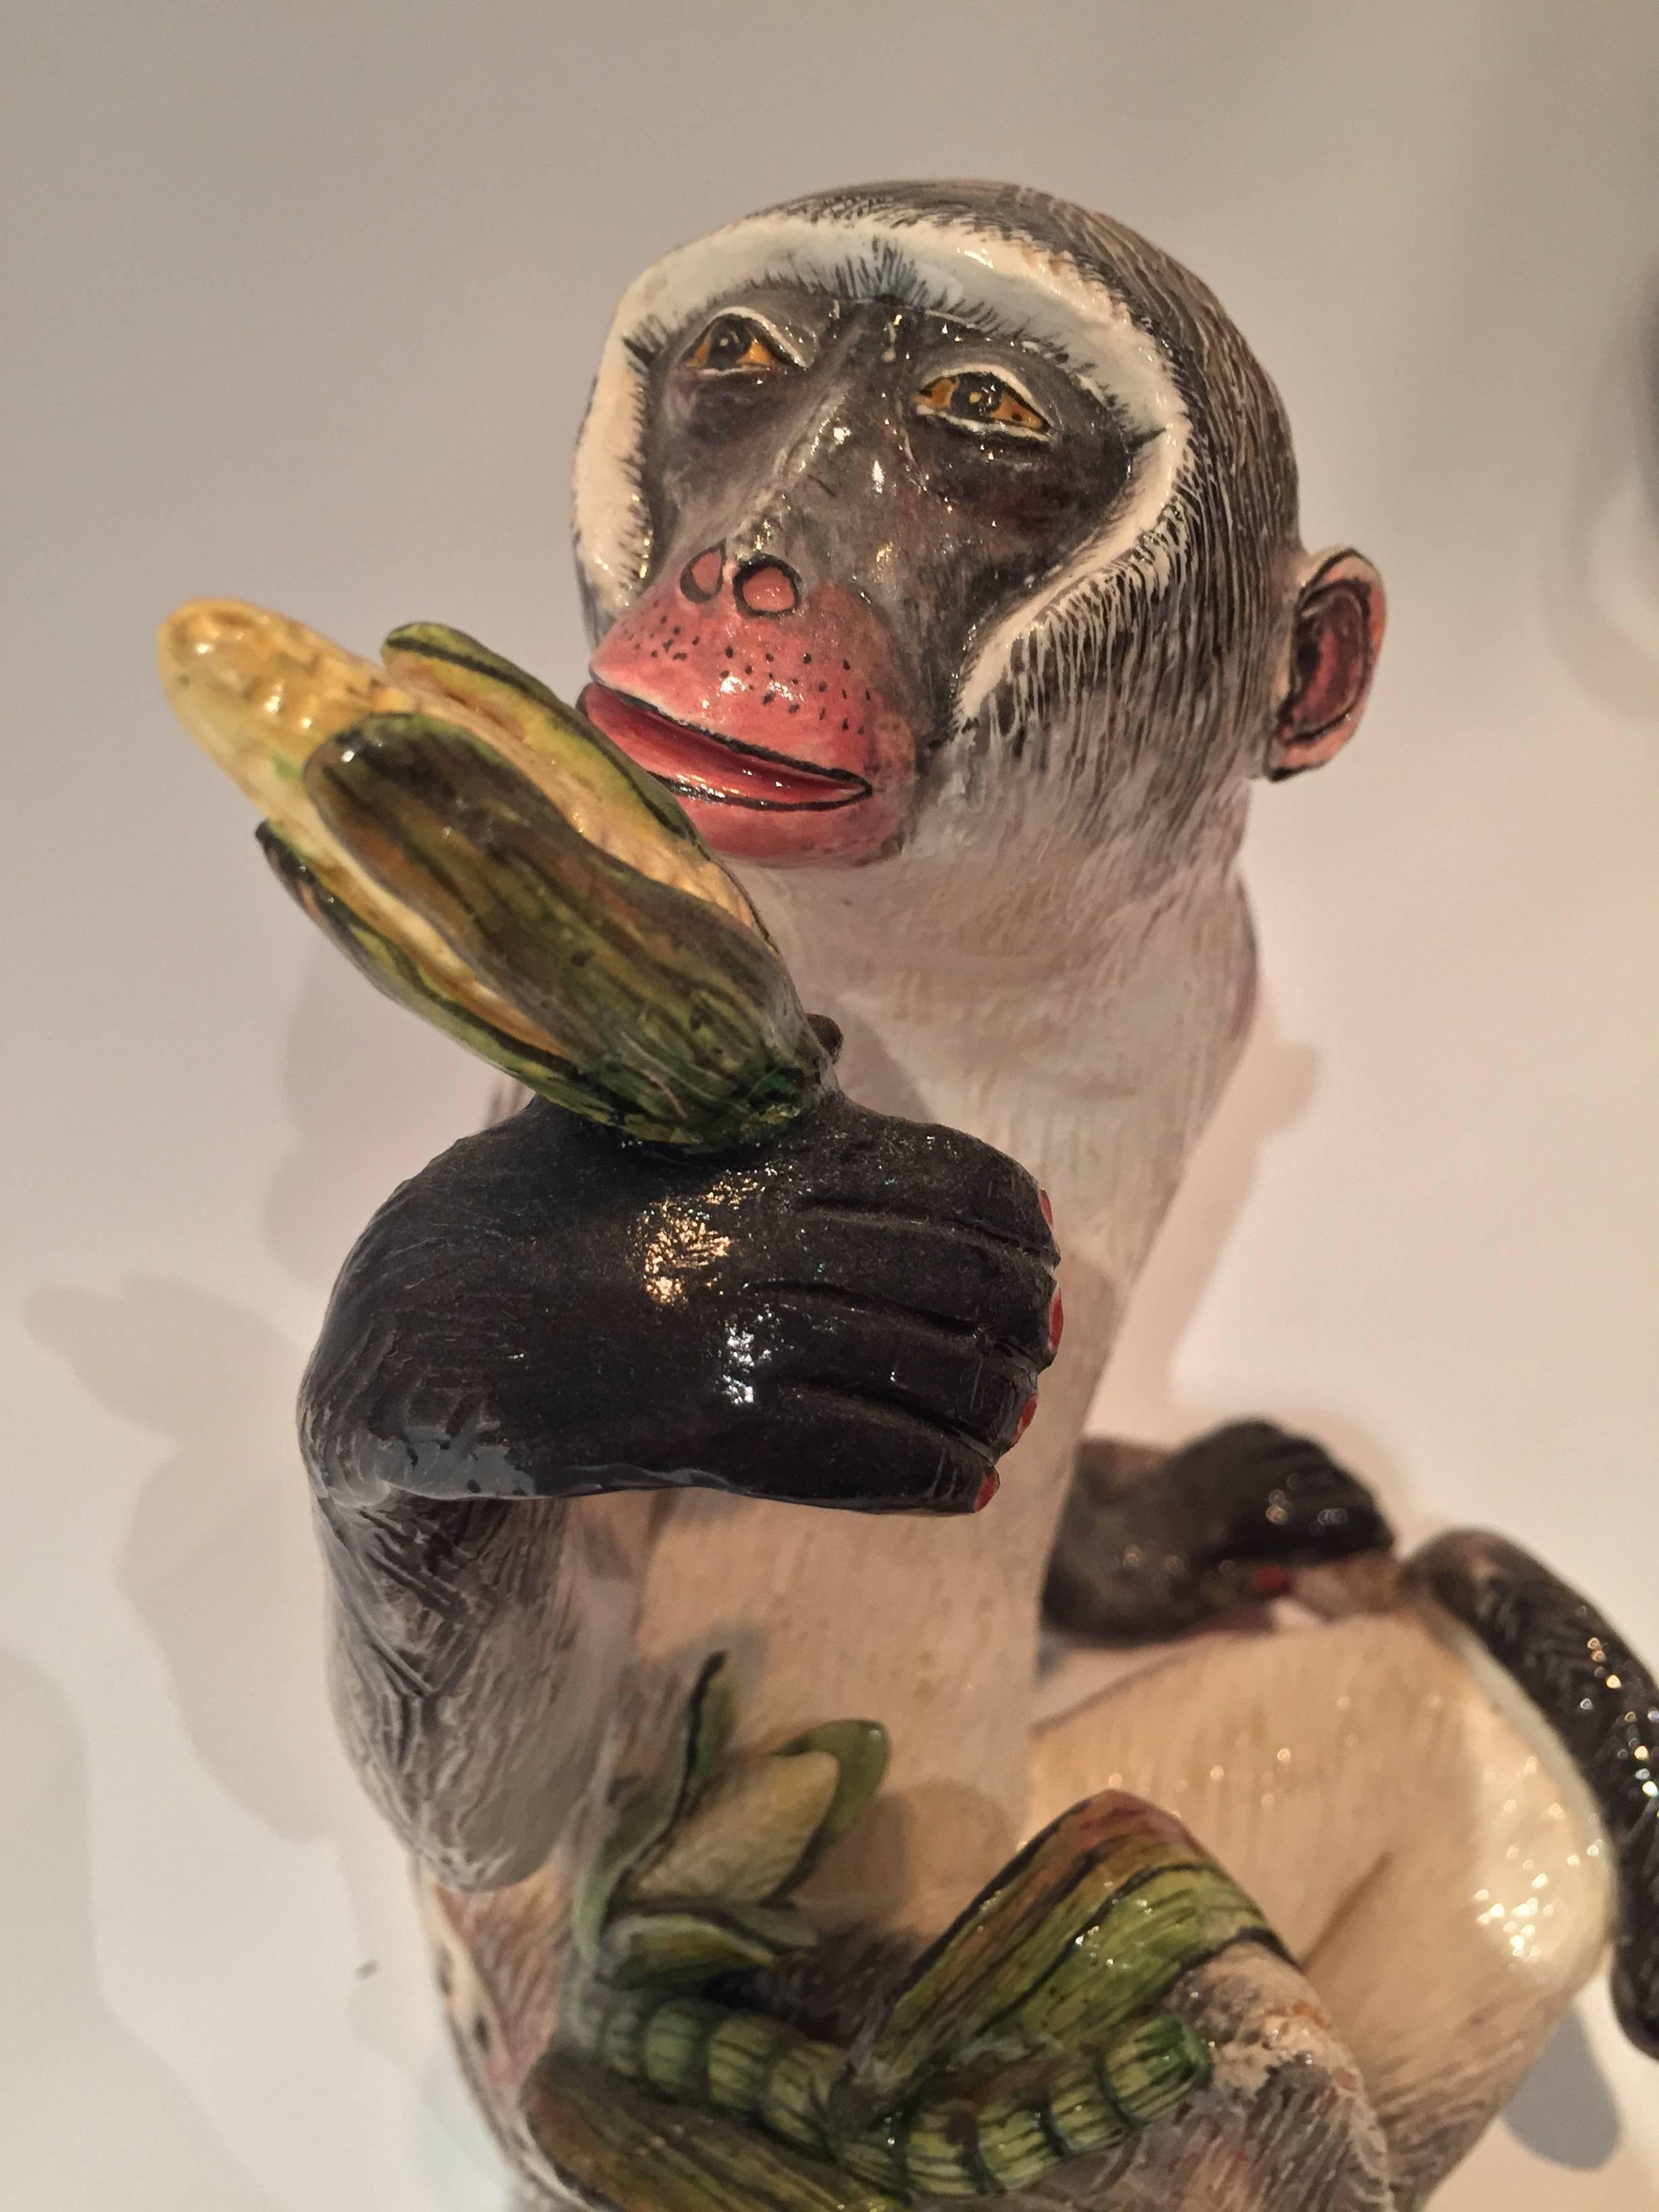 Folk Art Monkey with Corn Sculpture by Ardmore from South Africa